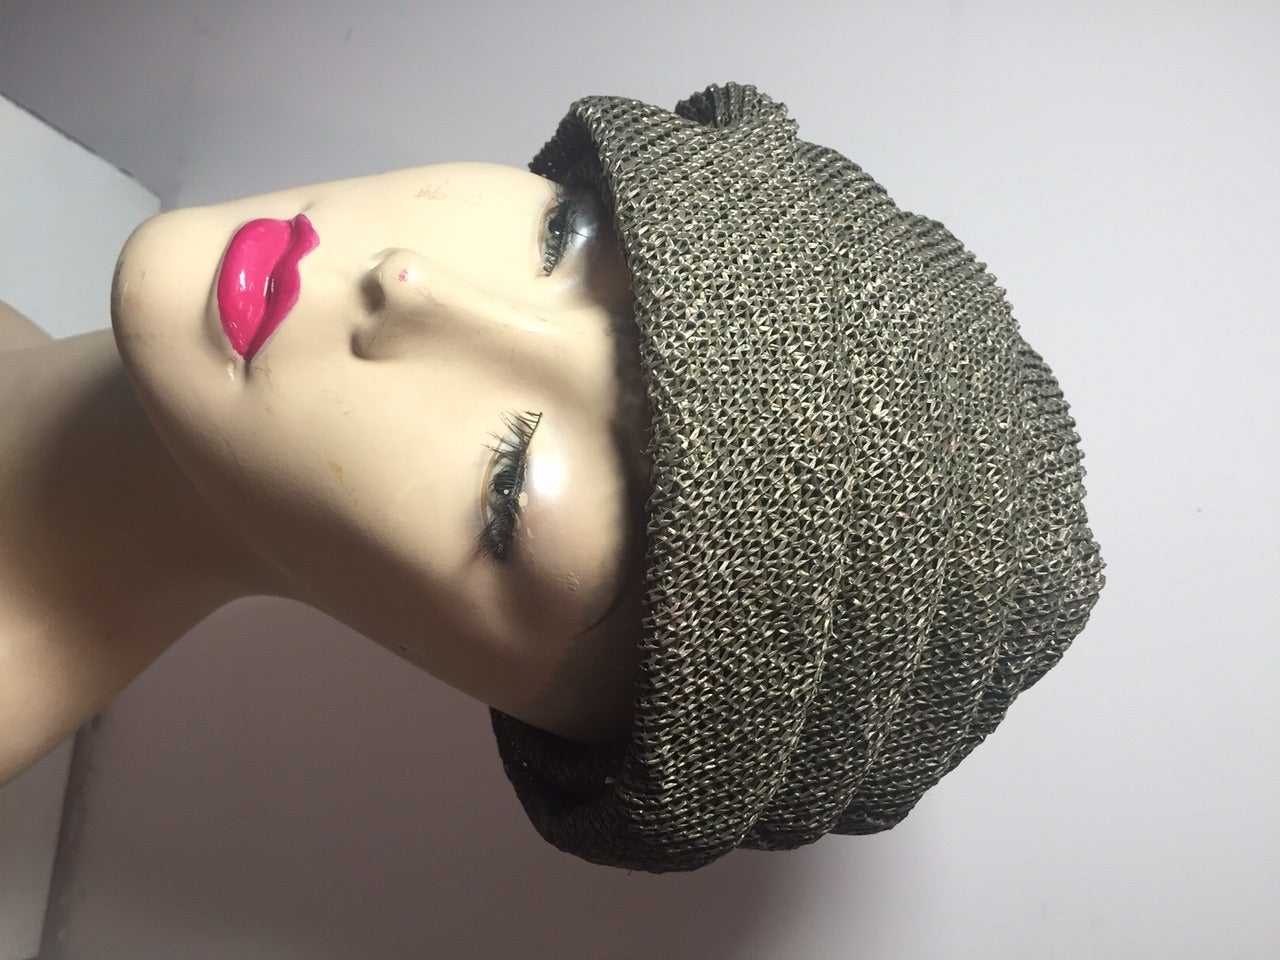 A lovely 1950s draped turban hat in olive woven buckram by Spanish couturier Pertegaz!  Lined in netting with grosgrain band.  